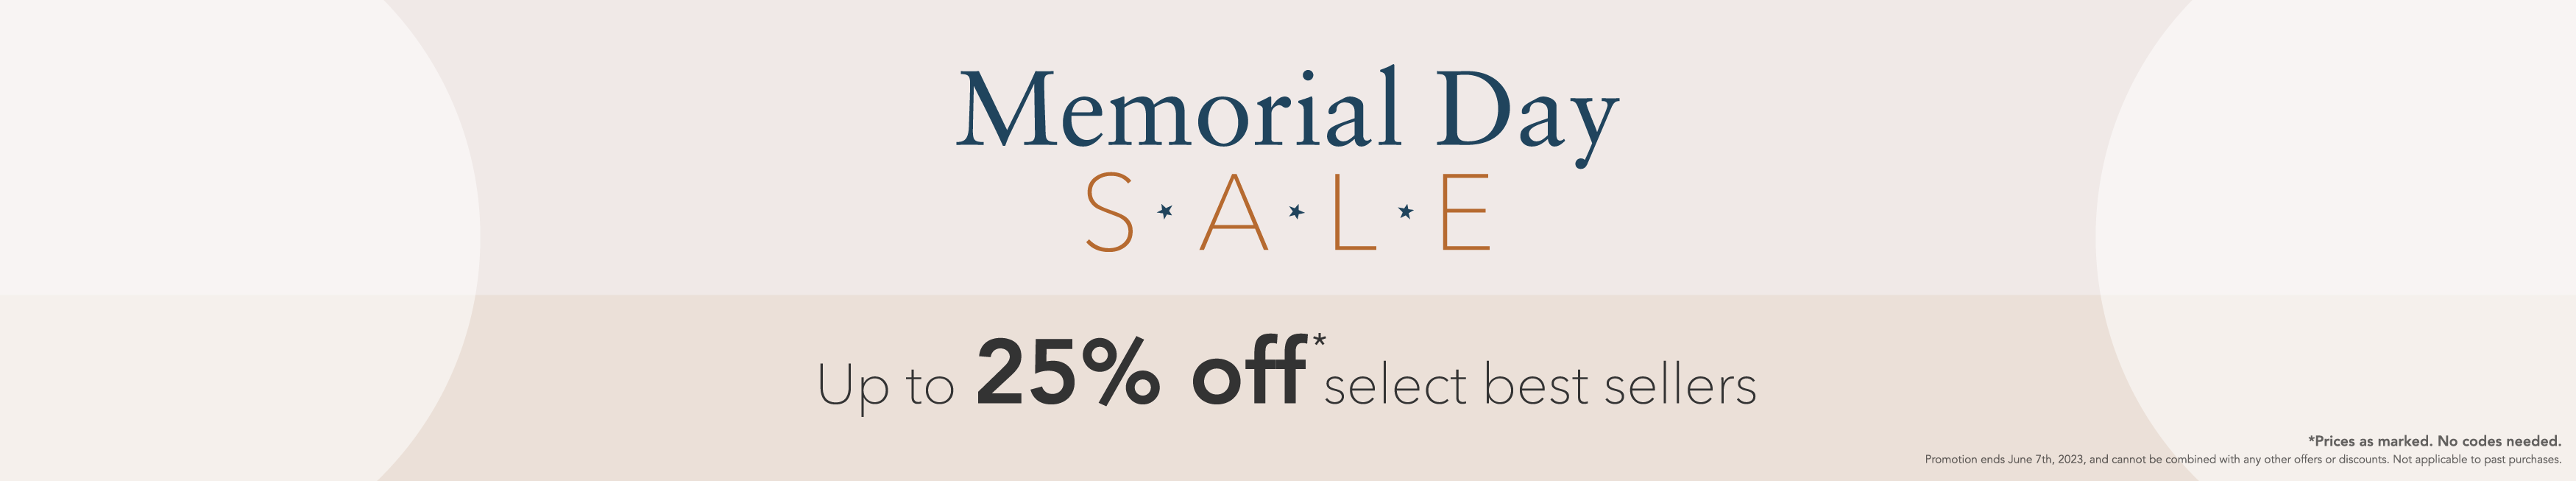 Memorial Day Sale - Up to 25% off select best sellers. Terms and conditions apply.